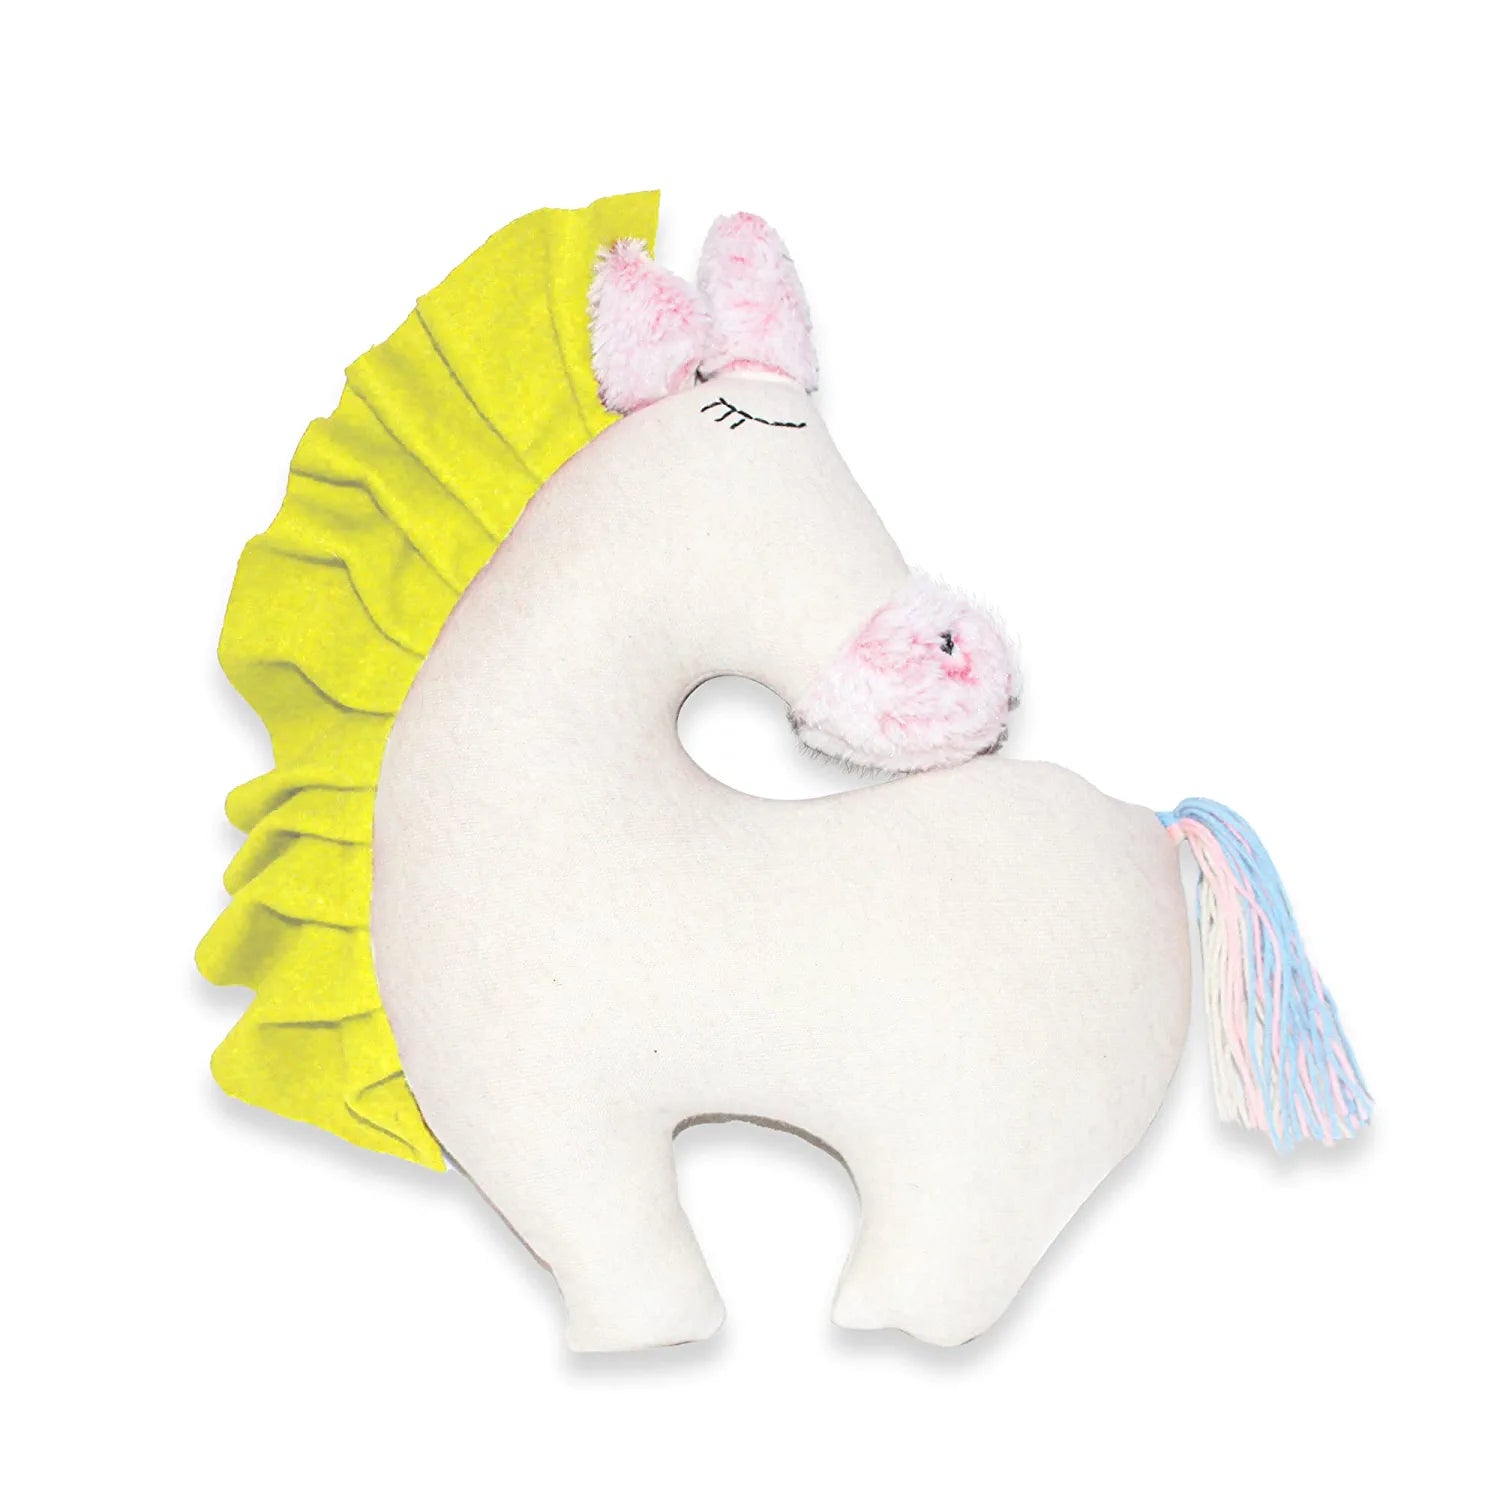 Unicorn Stuffed Soft Toys for Girls Gift Washable 100% Safe for Kids (25cm, offwhite+yellow)